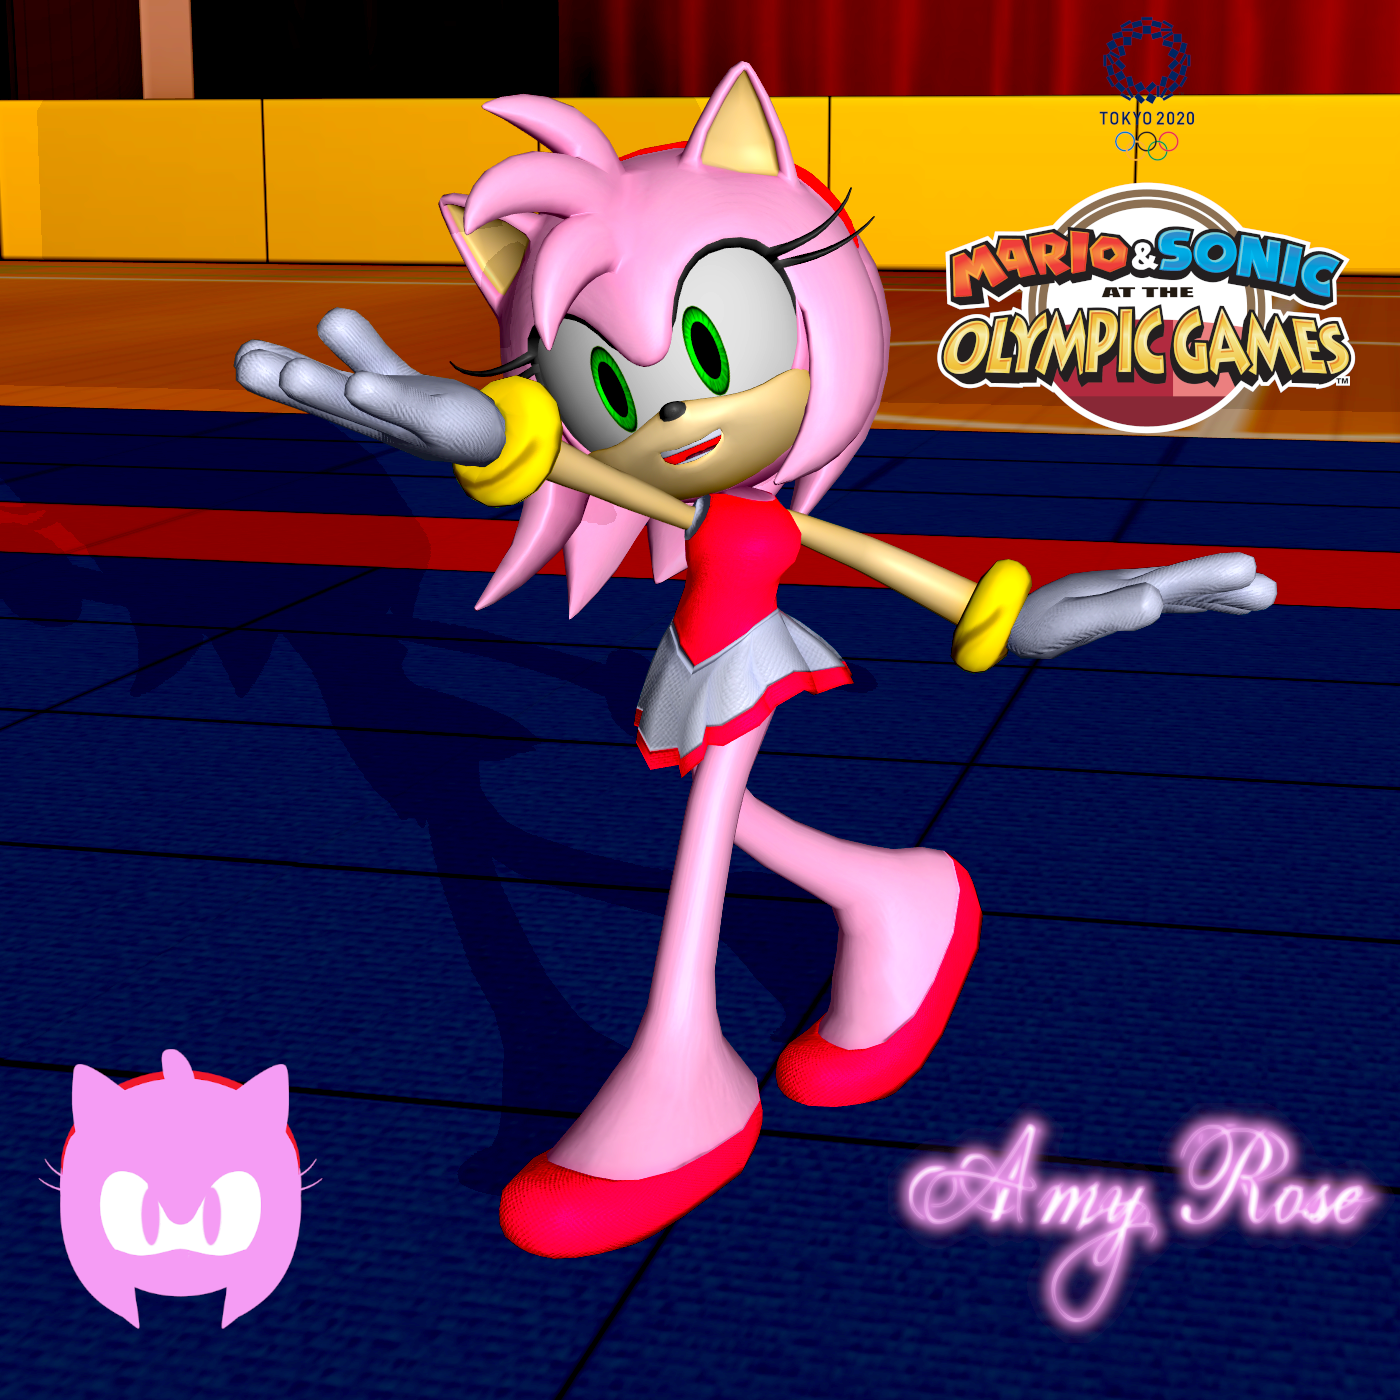 Amy Rose [sonic frontiers] by Di-Dash on DeviantArt